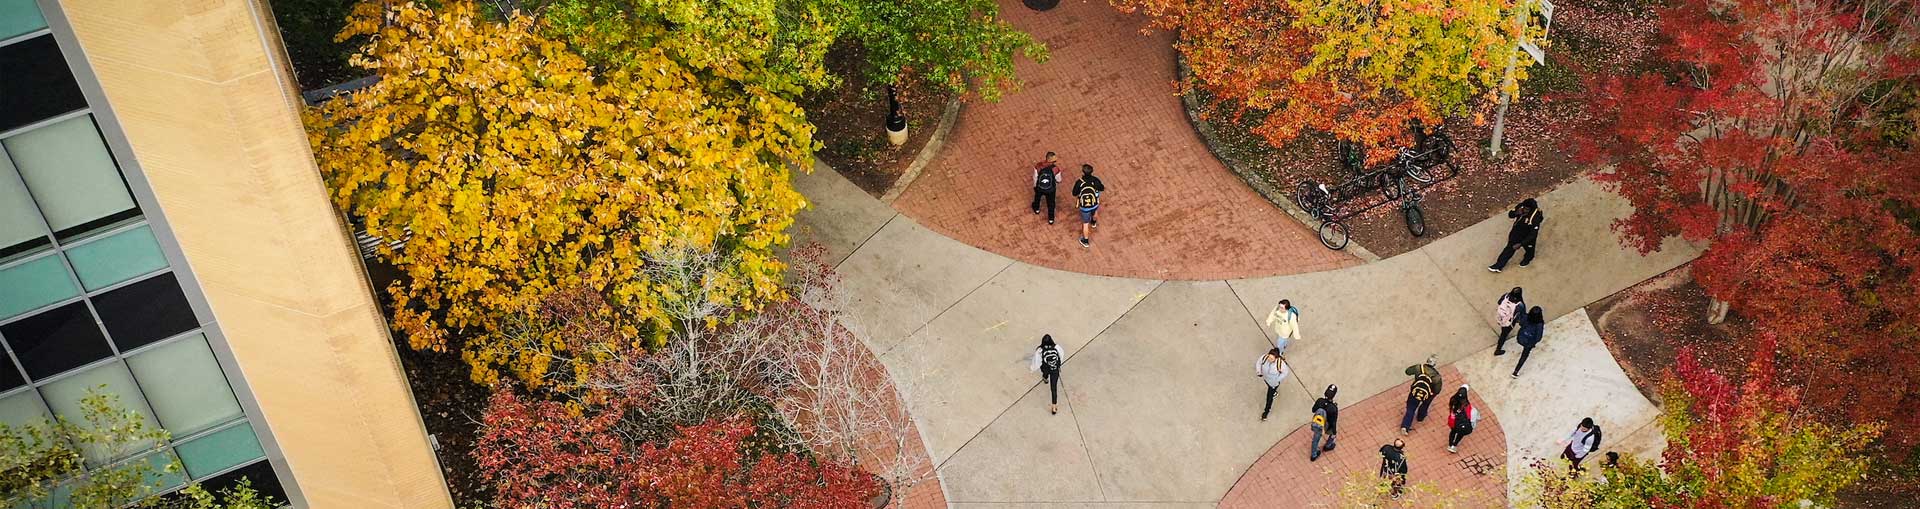 ksu outside commons area in fall time